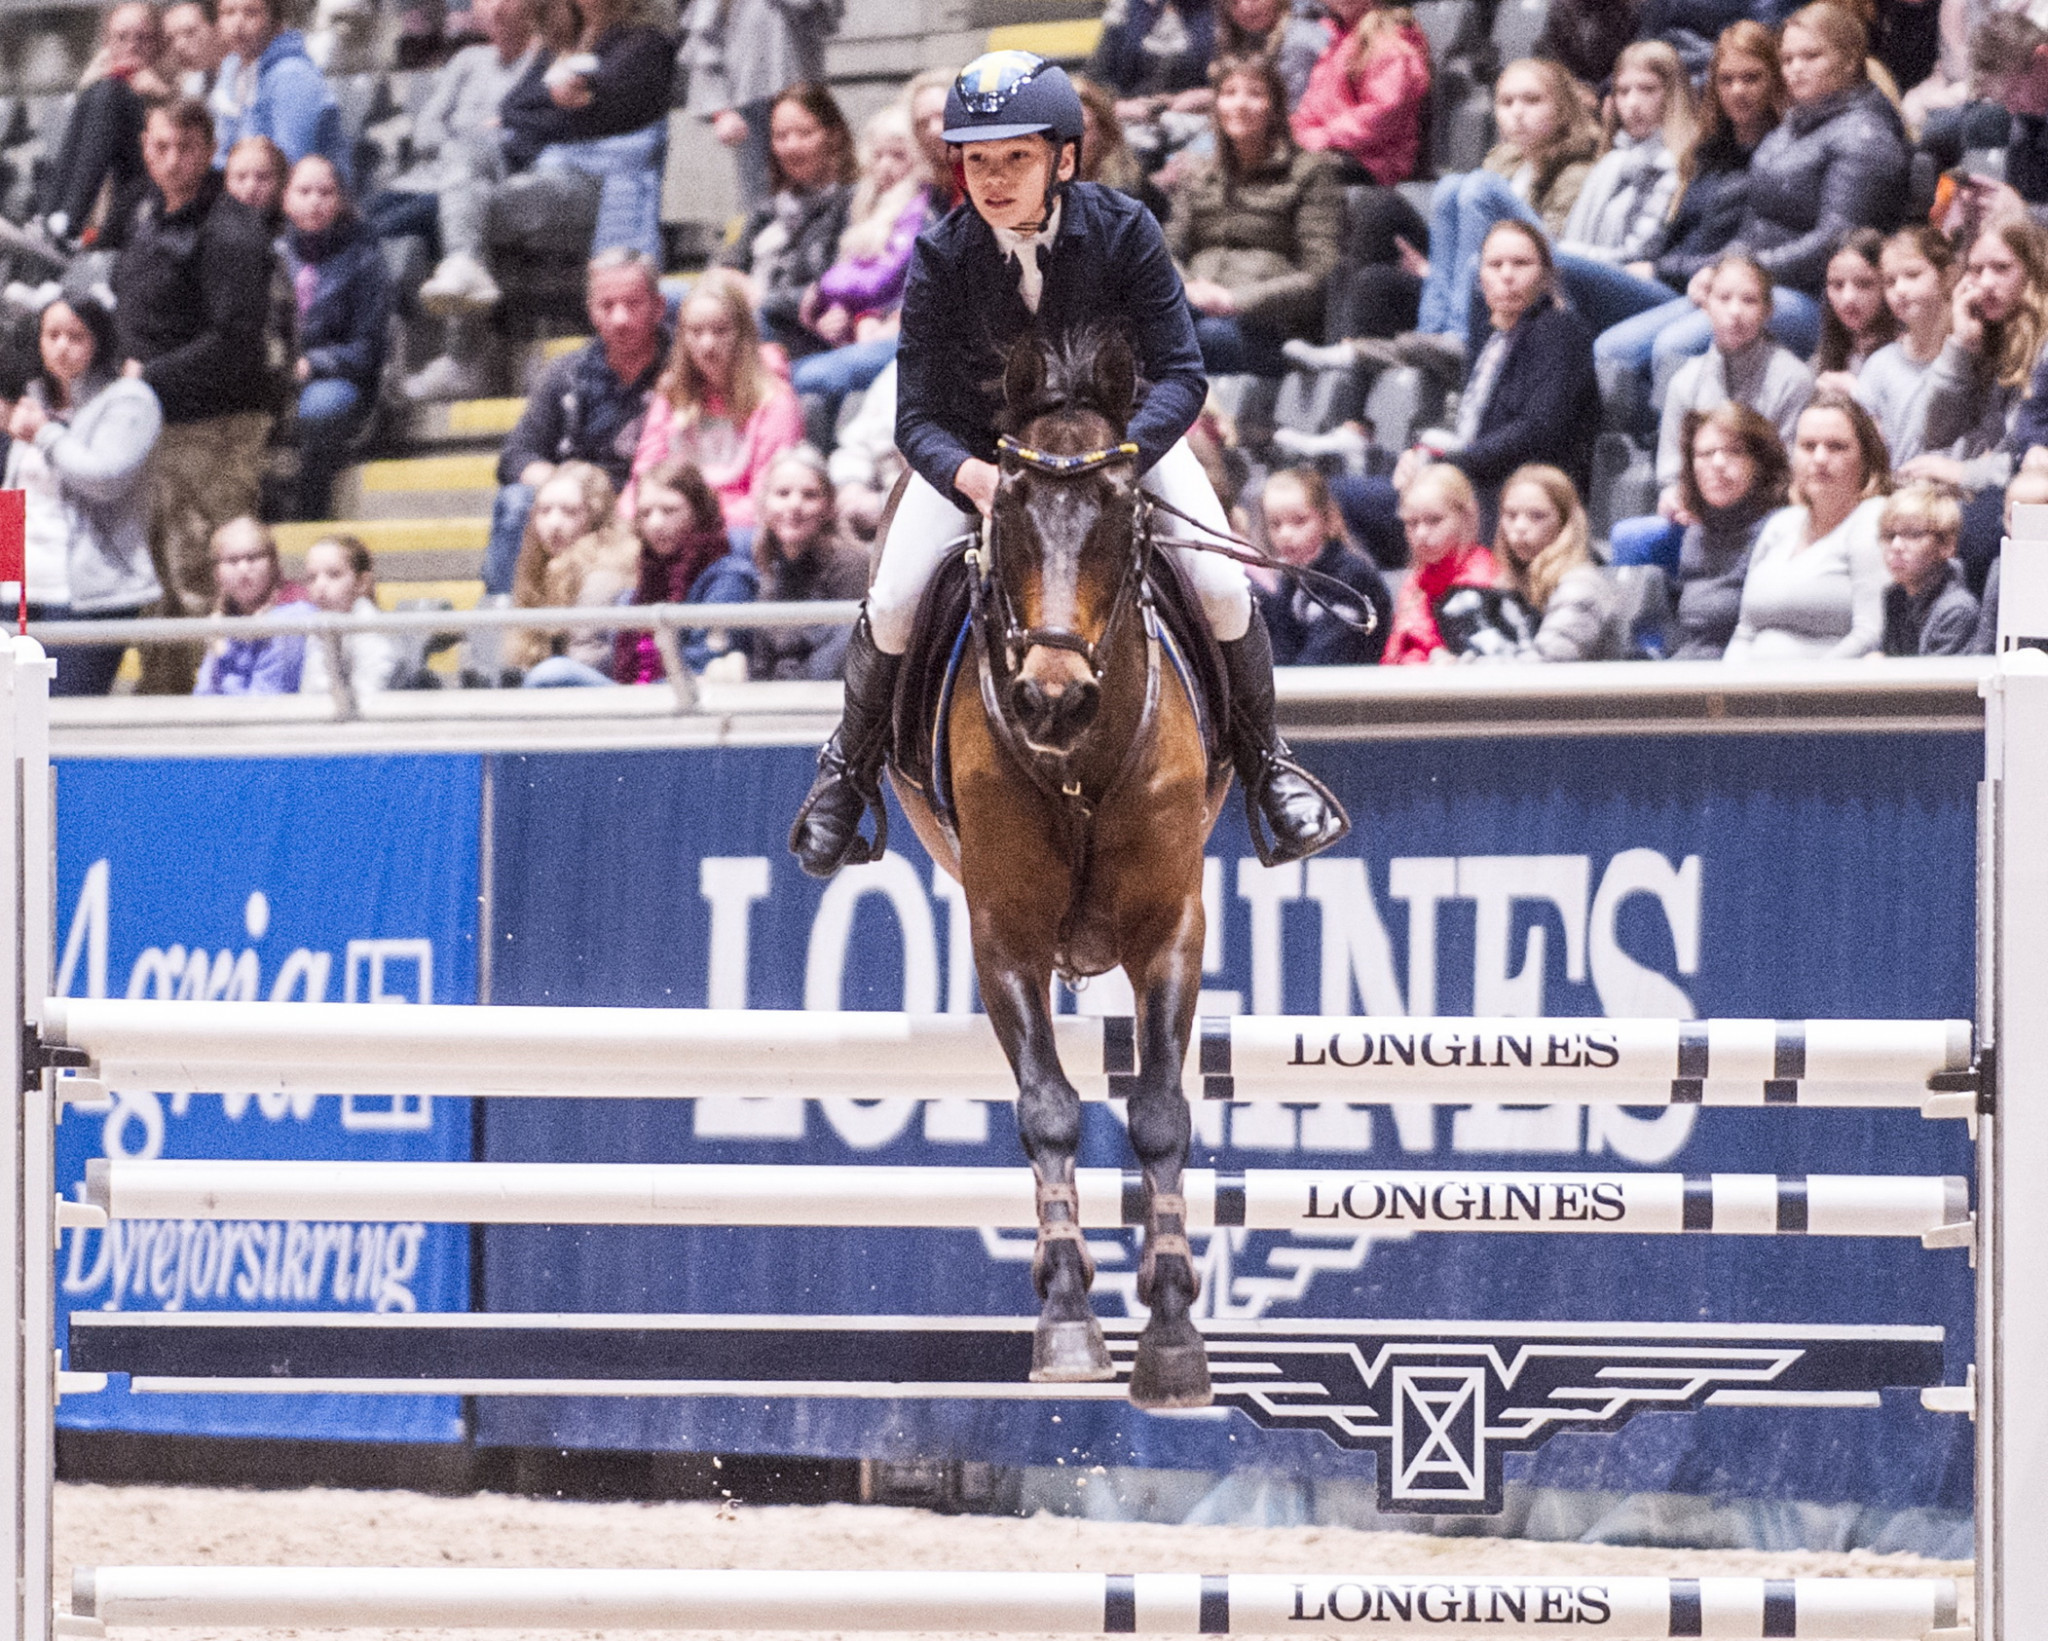 FEI announce host cities for youth equestrian events